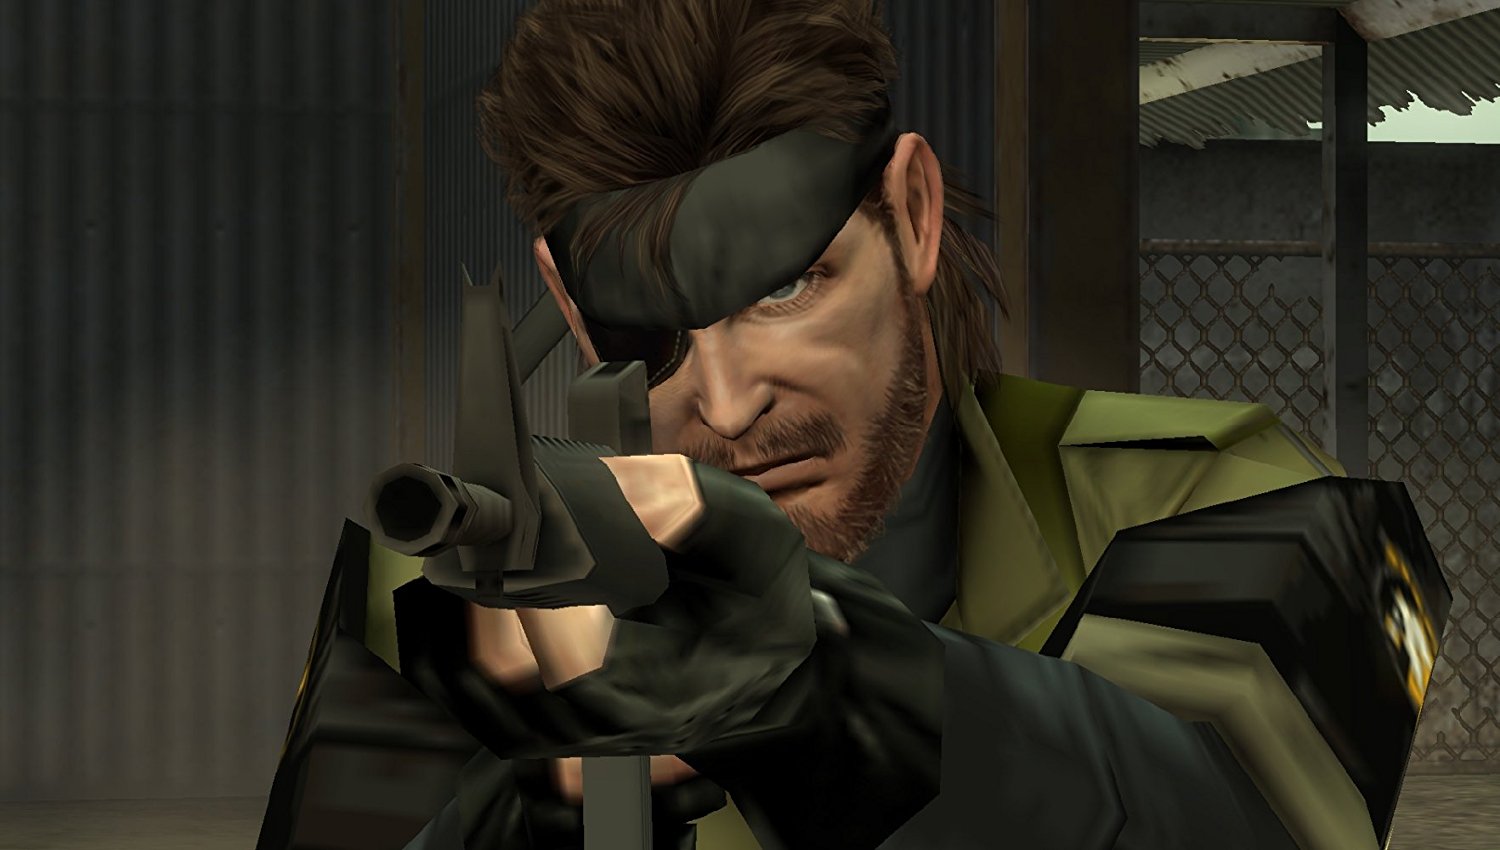 What Does Liquid Snake Want?